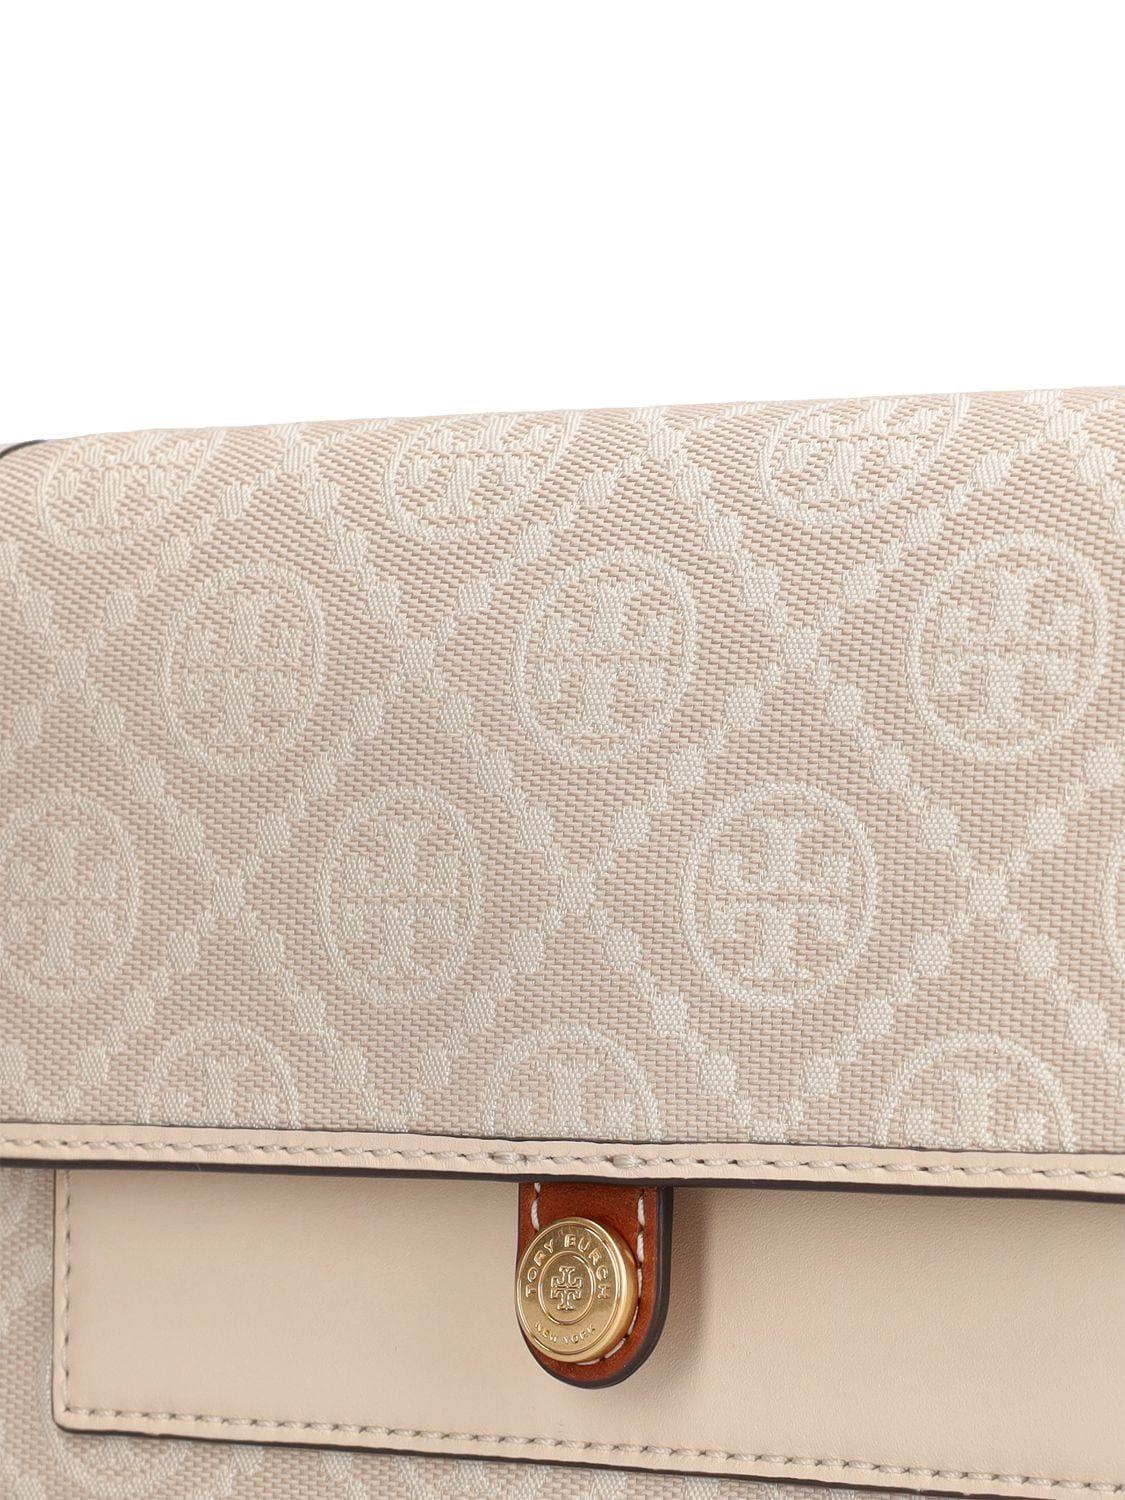 Tory Burch T Monogram Cotton Chain Wallet in Natural | Lyst